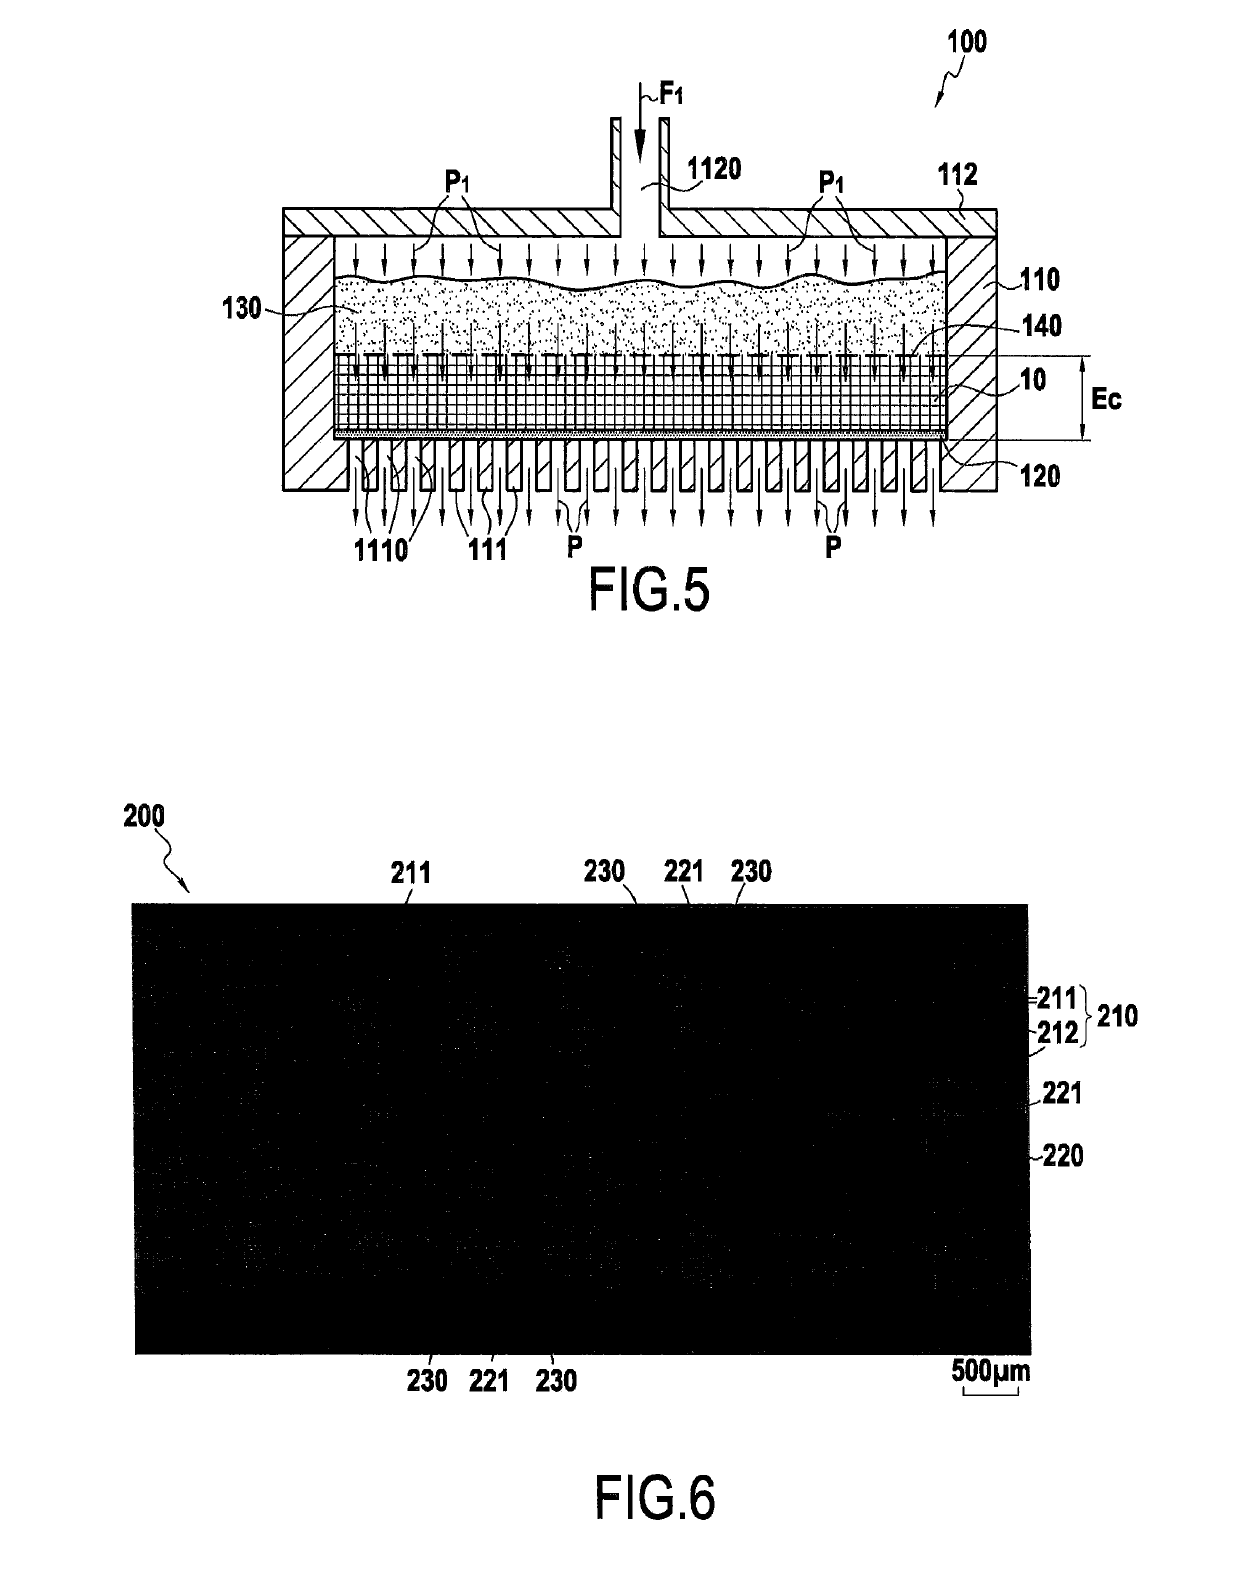 Part made from oxide/oxide composite material for 3-D reinforcing and method for manufacture of same